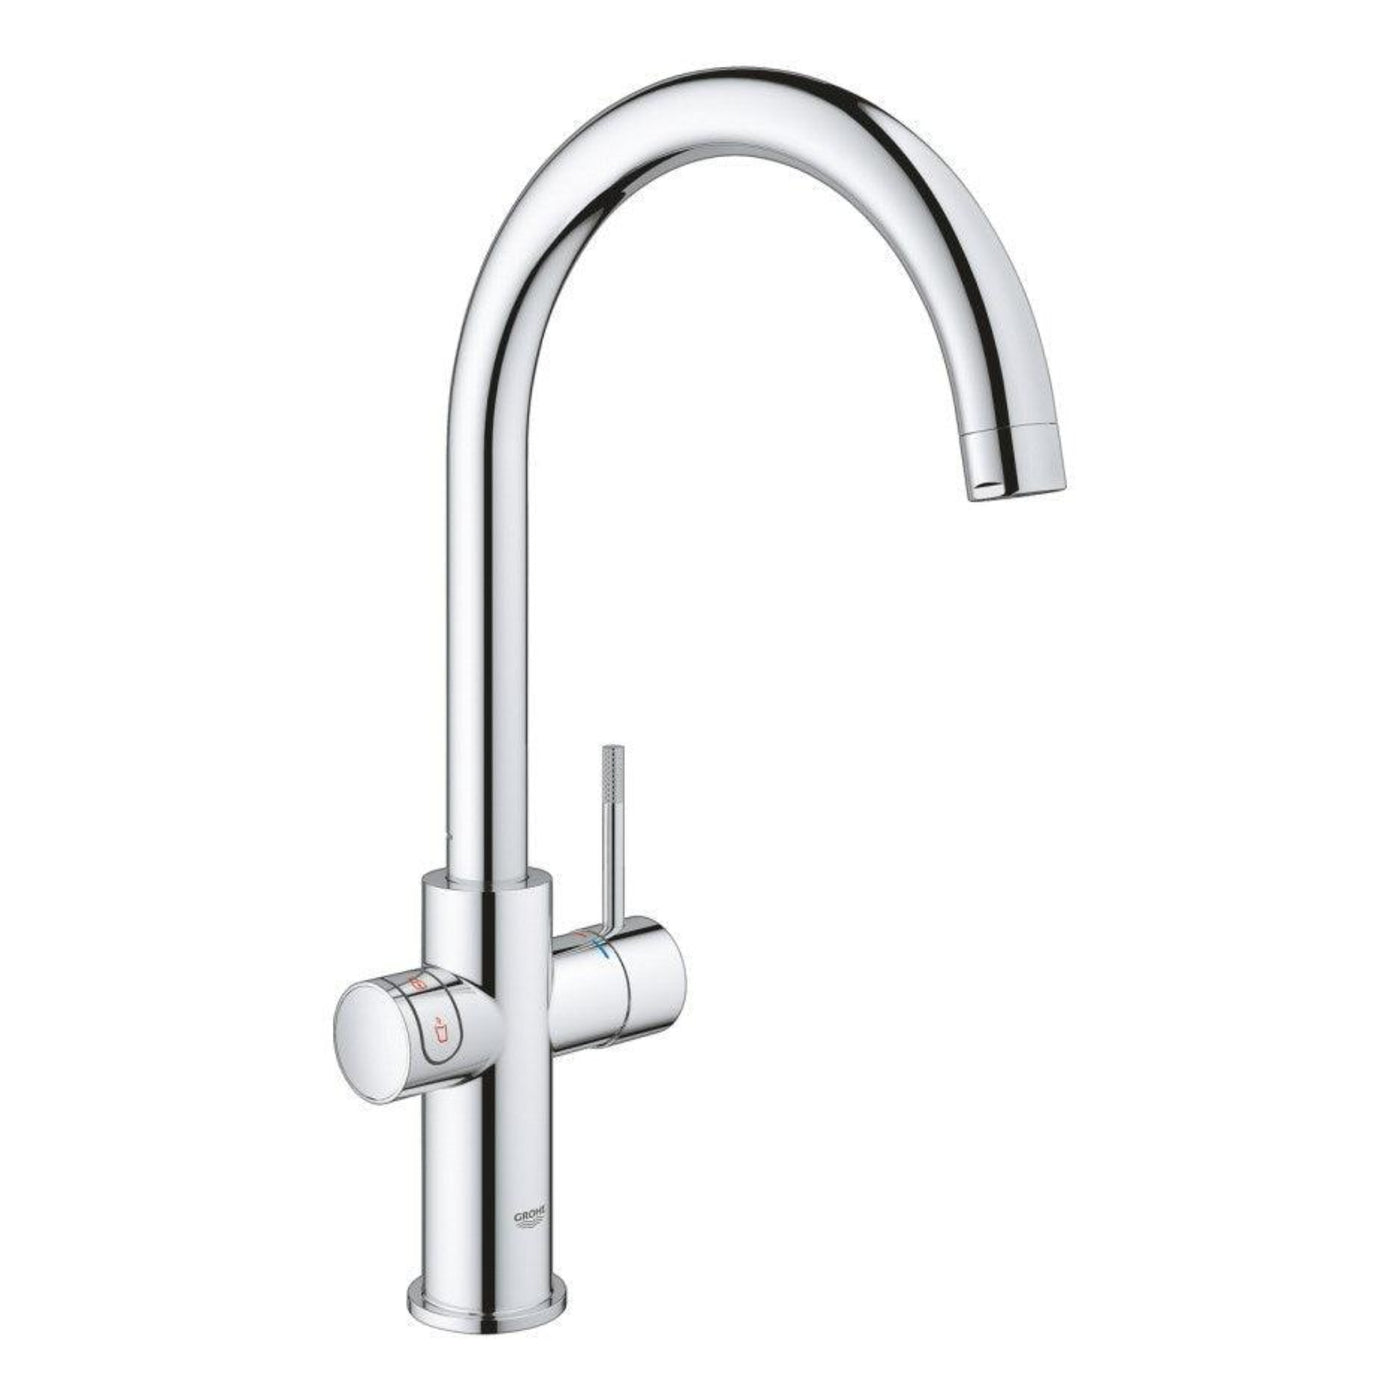 Grohe Red Duo Water Tap, Size Boiler, C-Spout – Tap